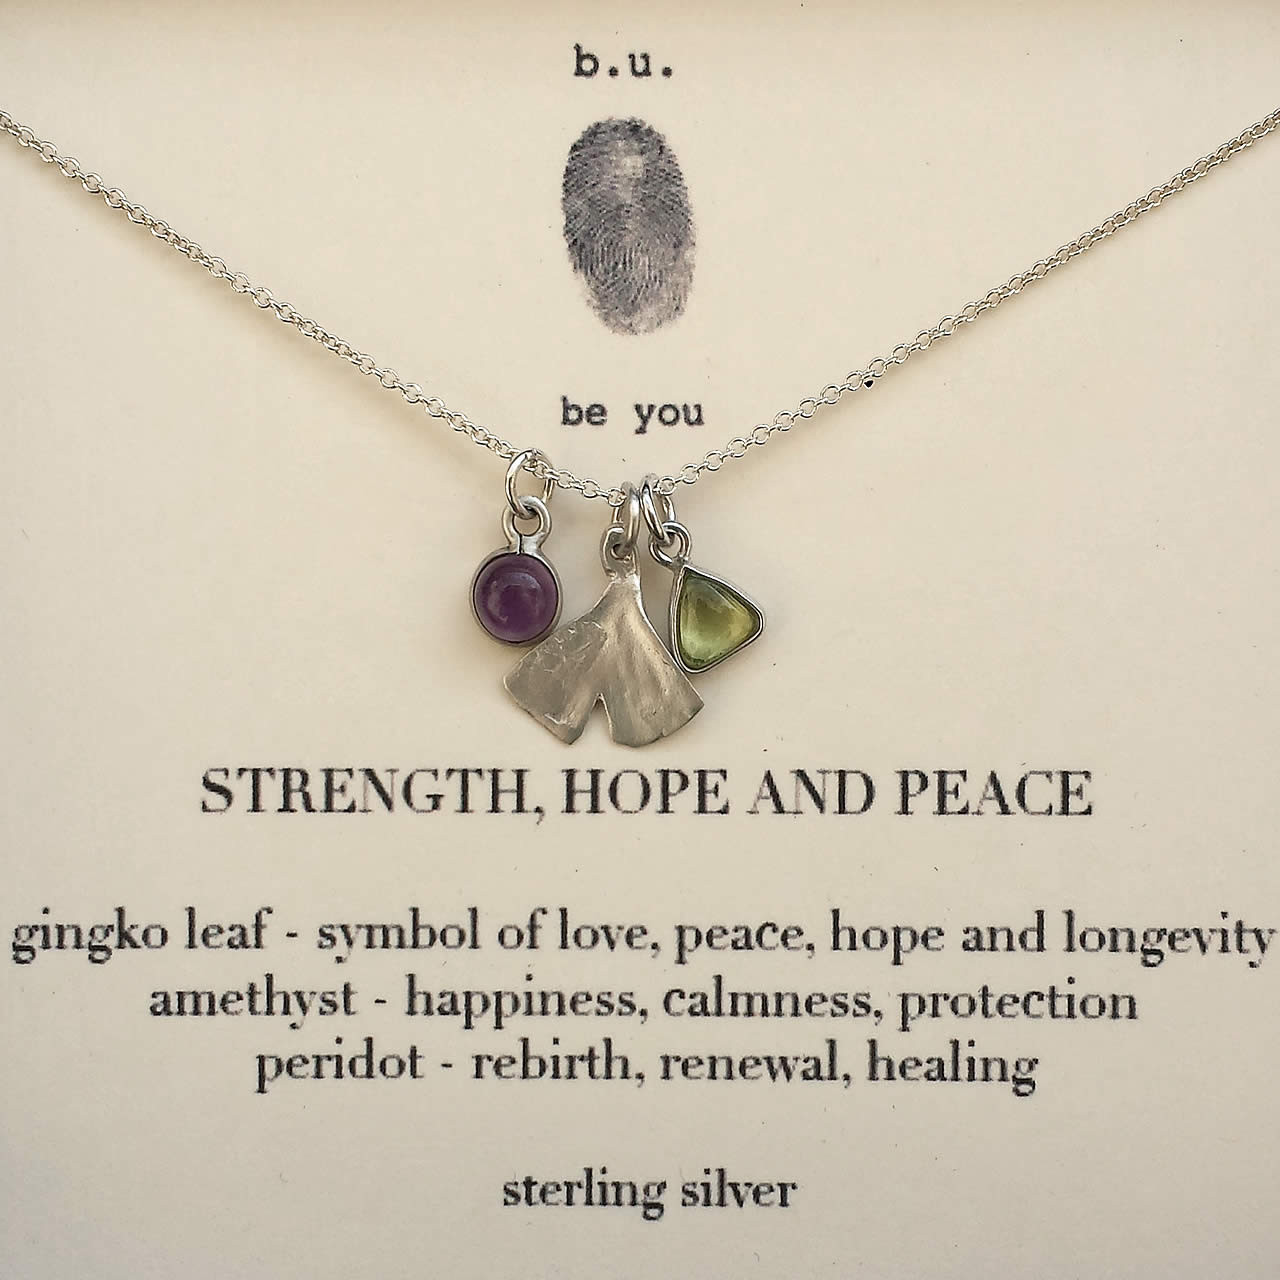 Strength, Hope and Peace Necklace by b.u. Jewelry| Giving Tree Gallery